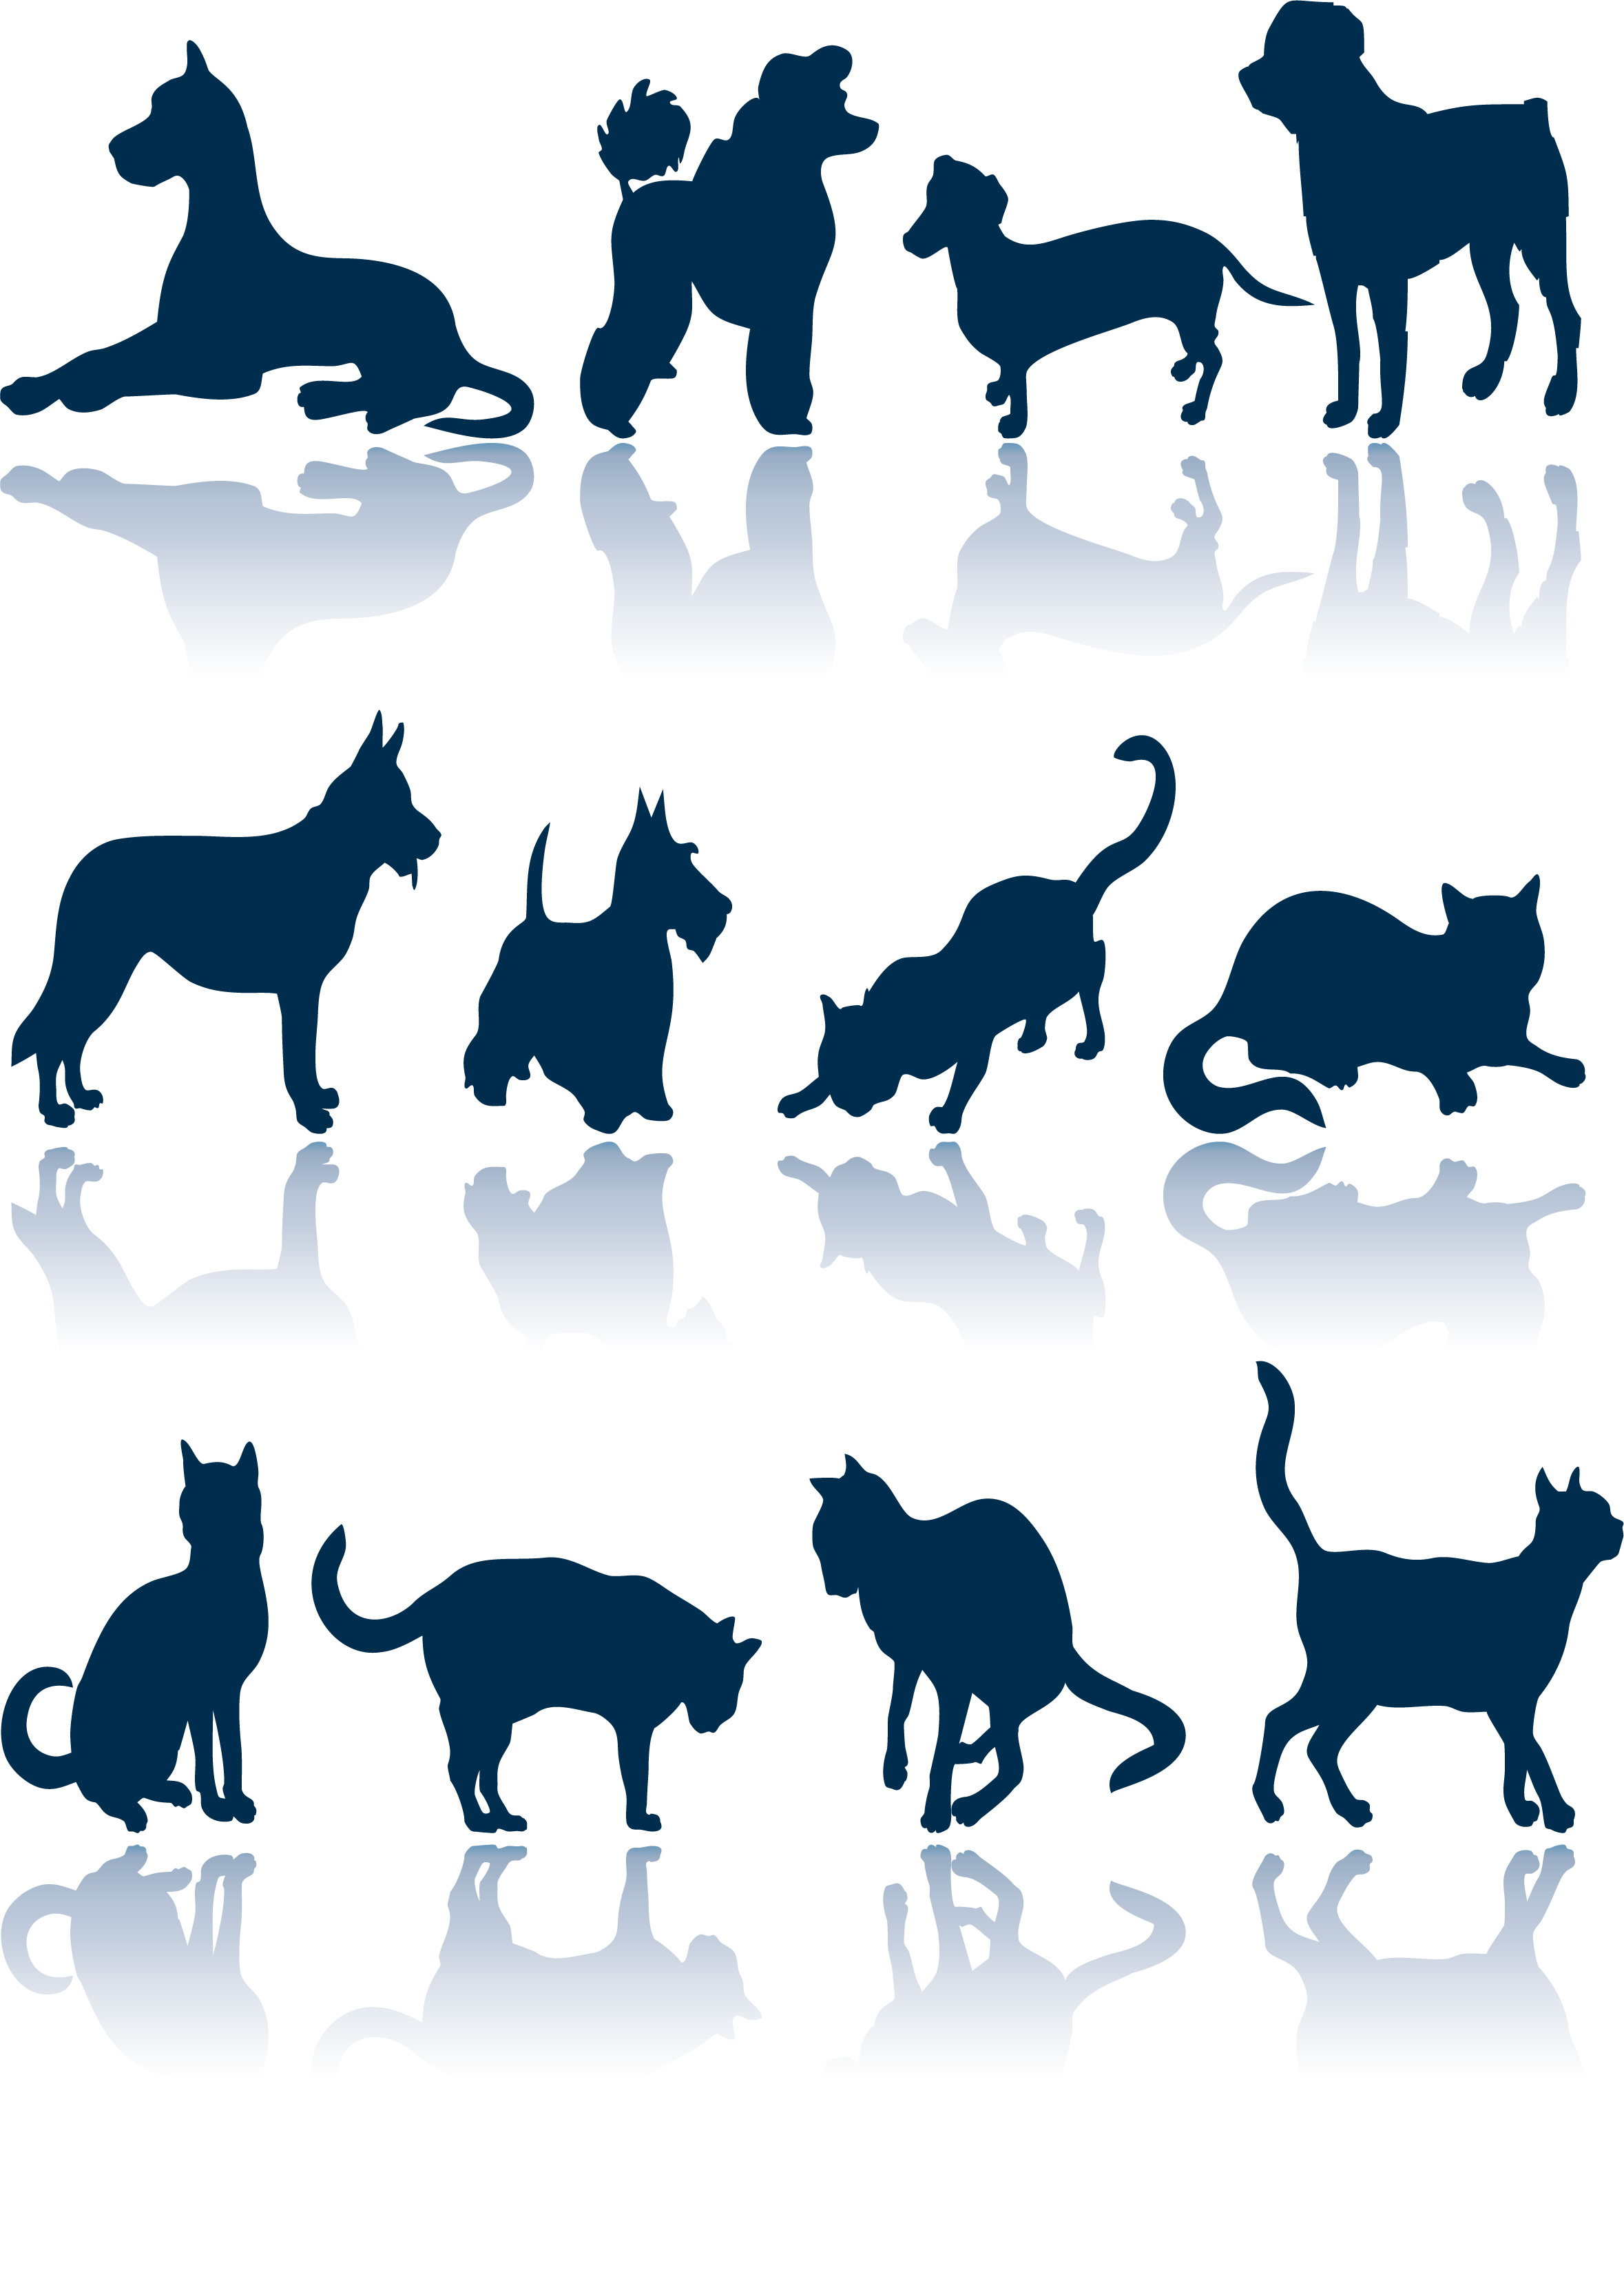 Cats and dogs silhouette vector Free Vector 